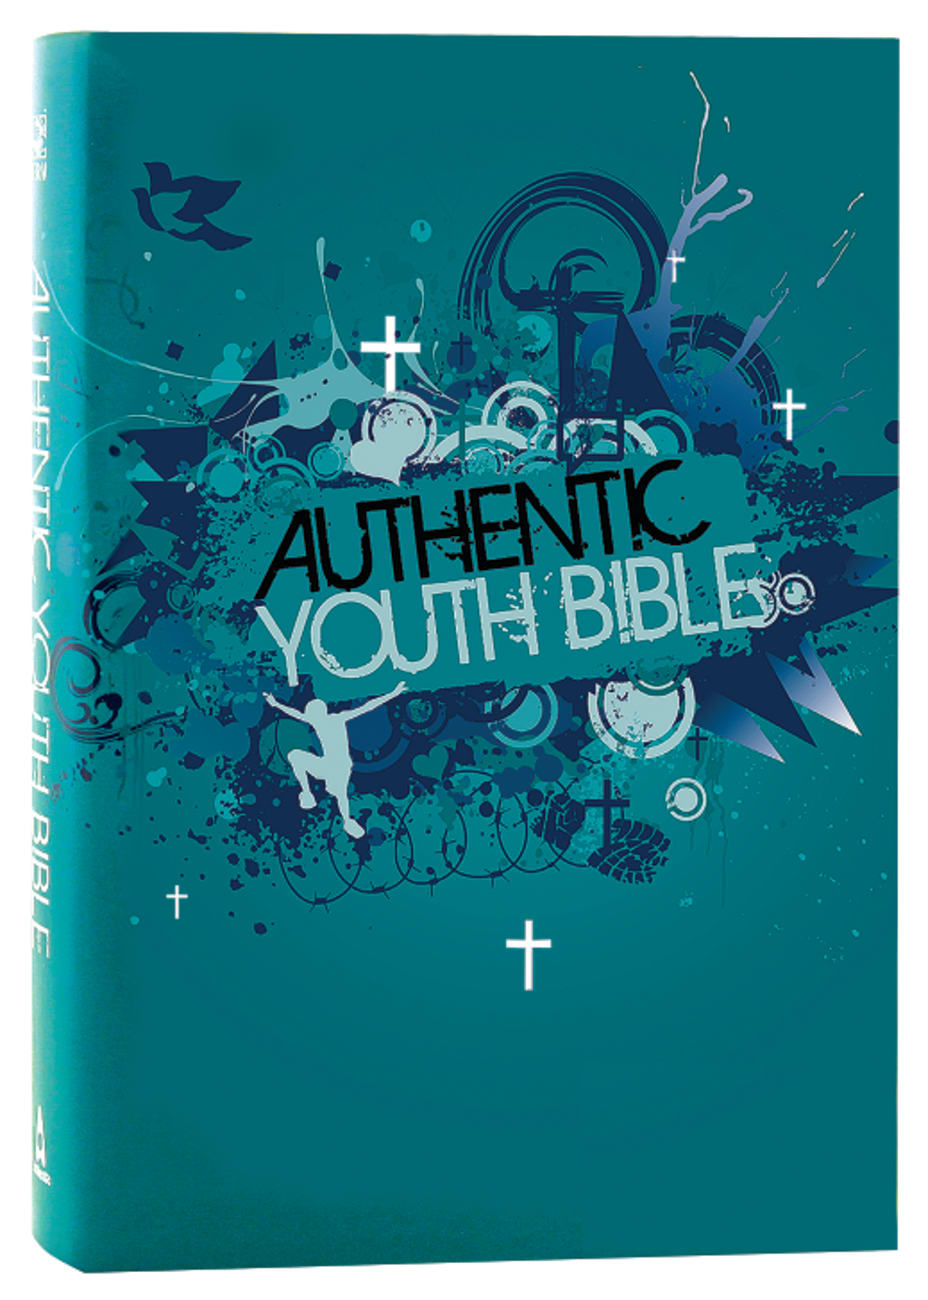 ERV Authentic Youth Bible Teal Hardback